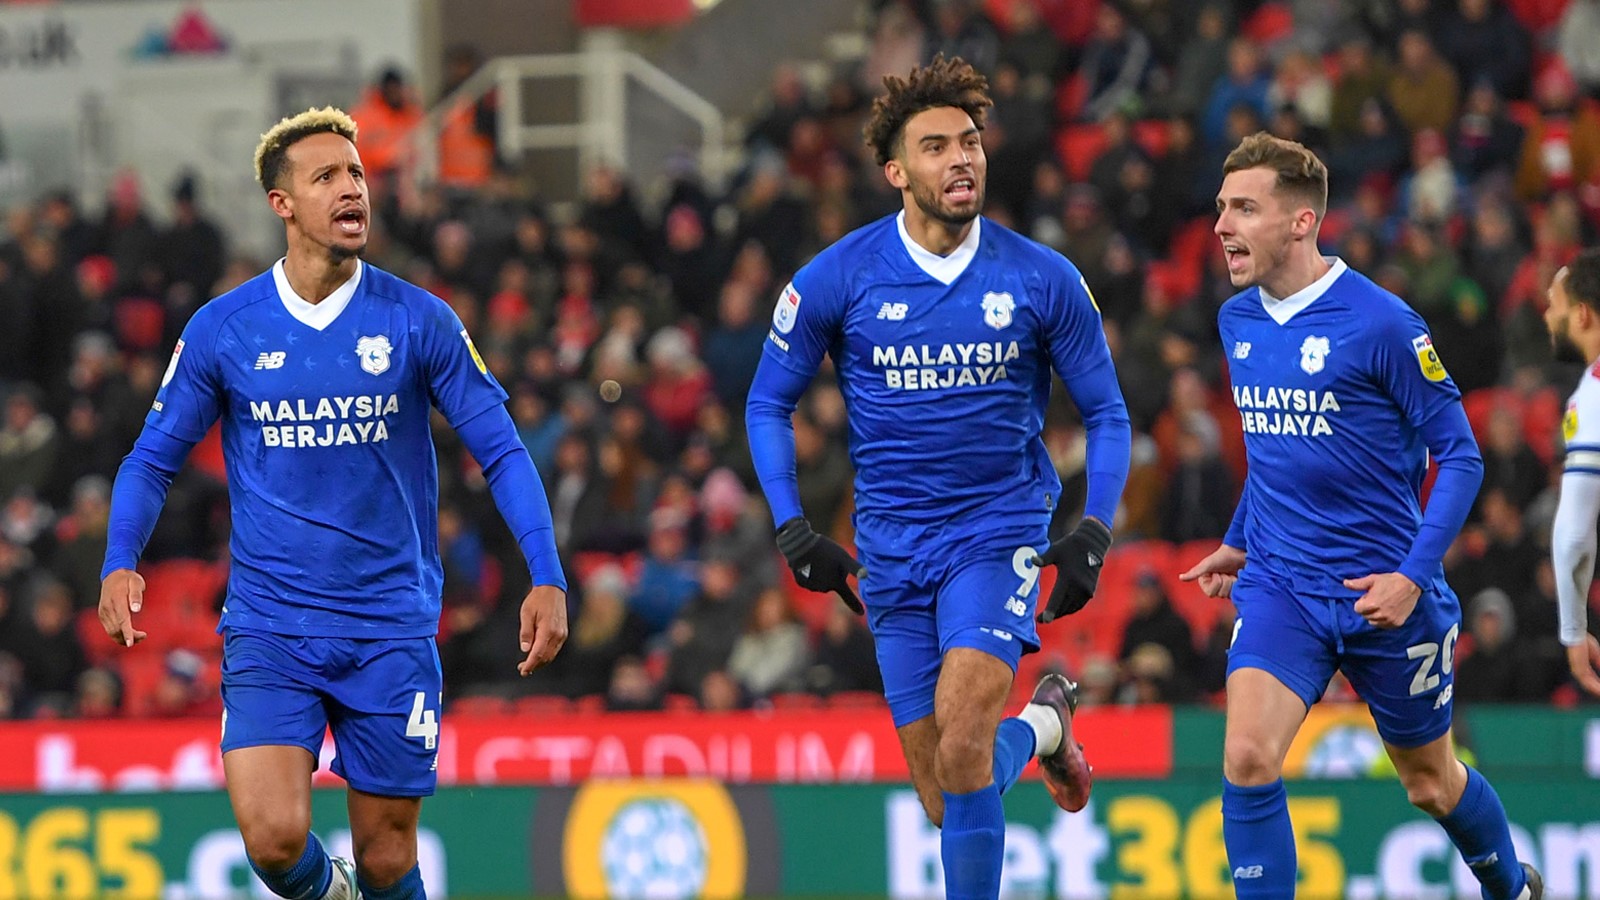 A transfer ban is never good news, but it could prove a blessing in disguise for Cardiff